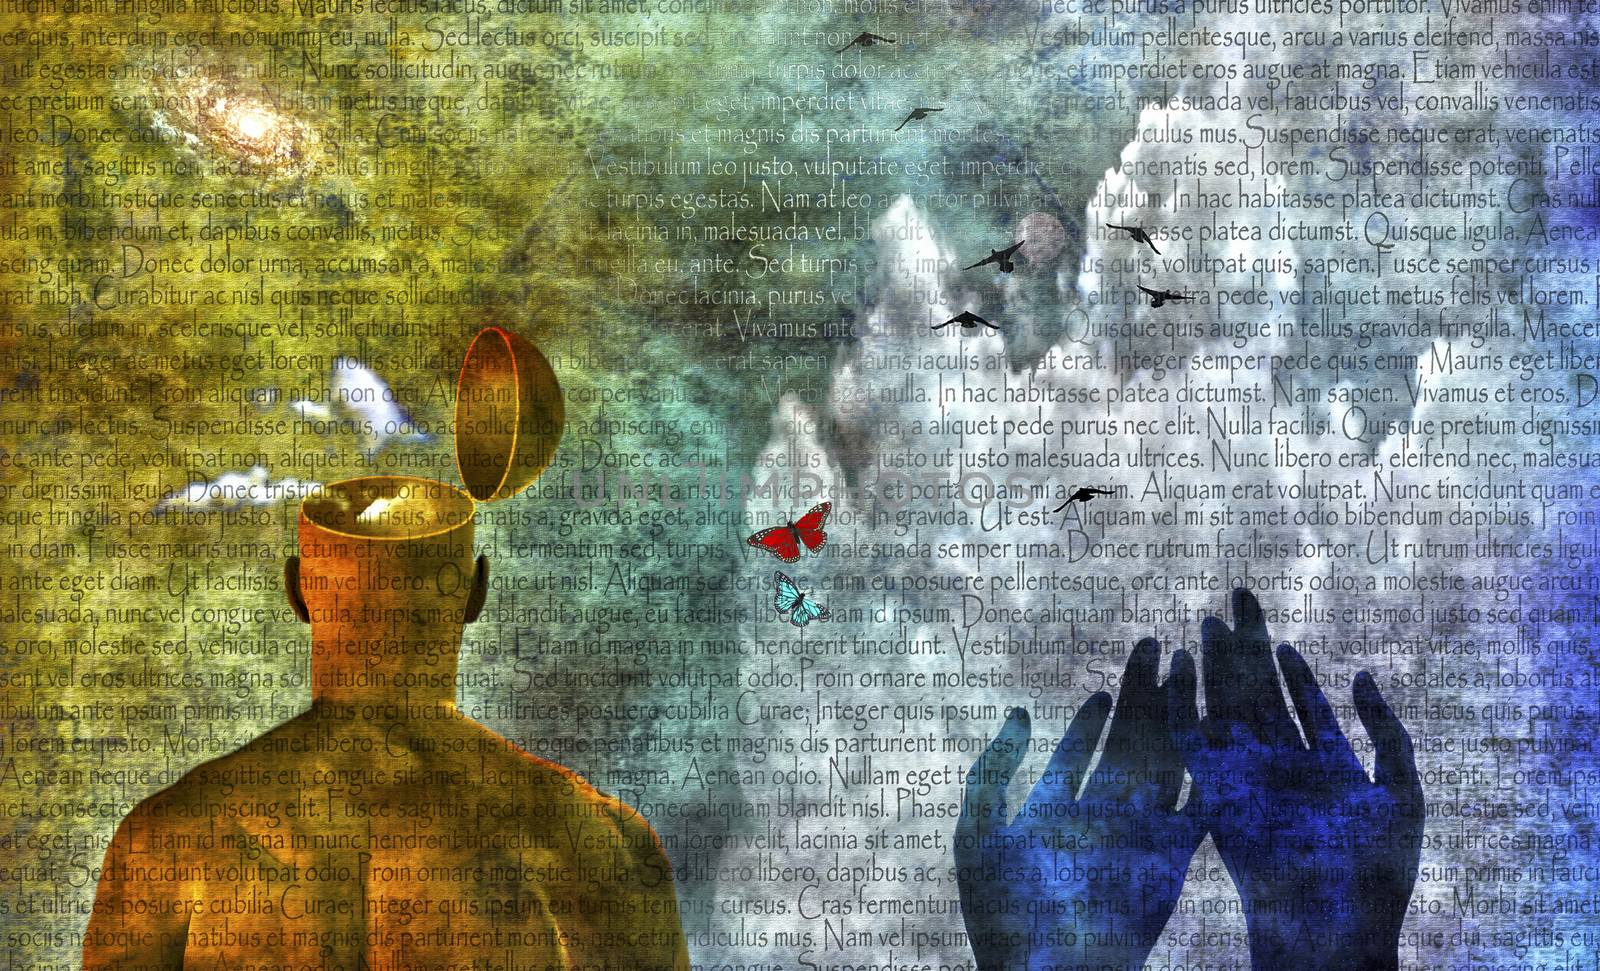 Man with open mind. Butterflies and Latin text. Hands of Creator